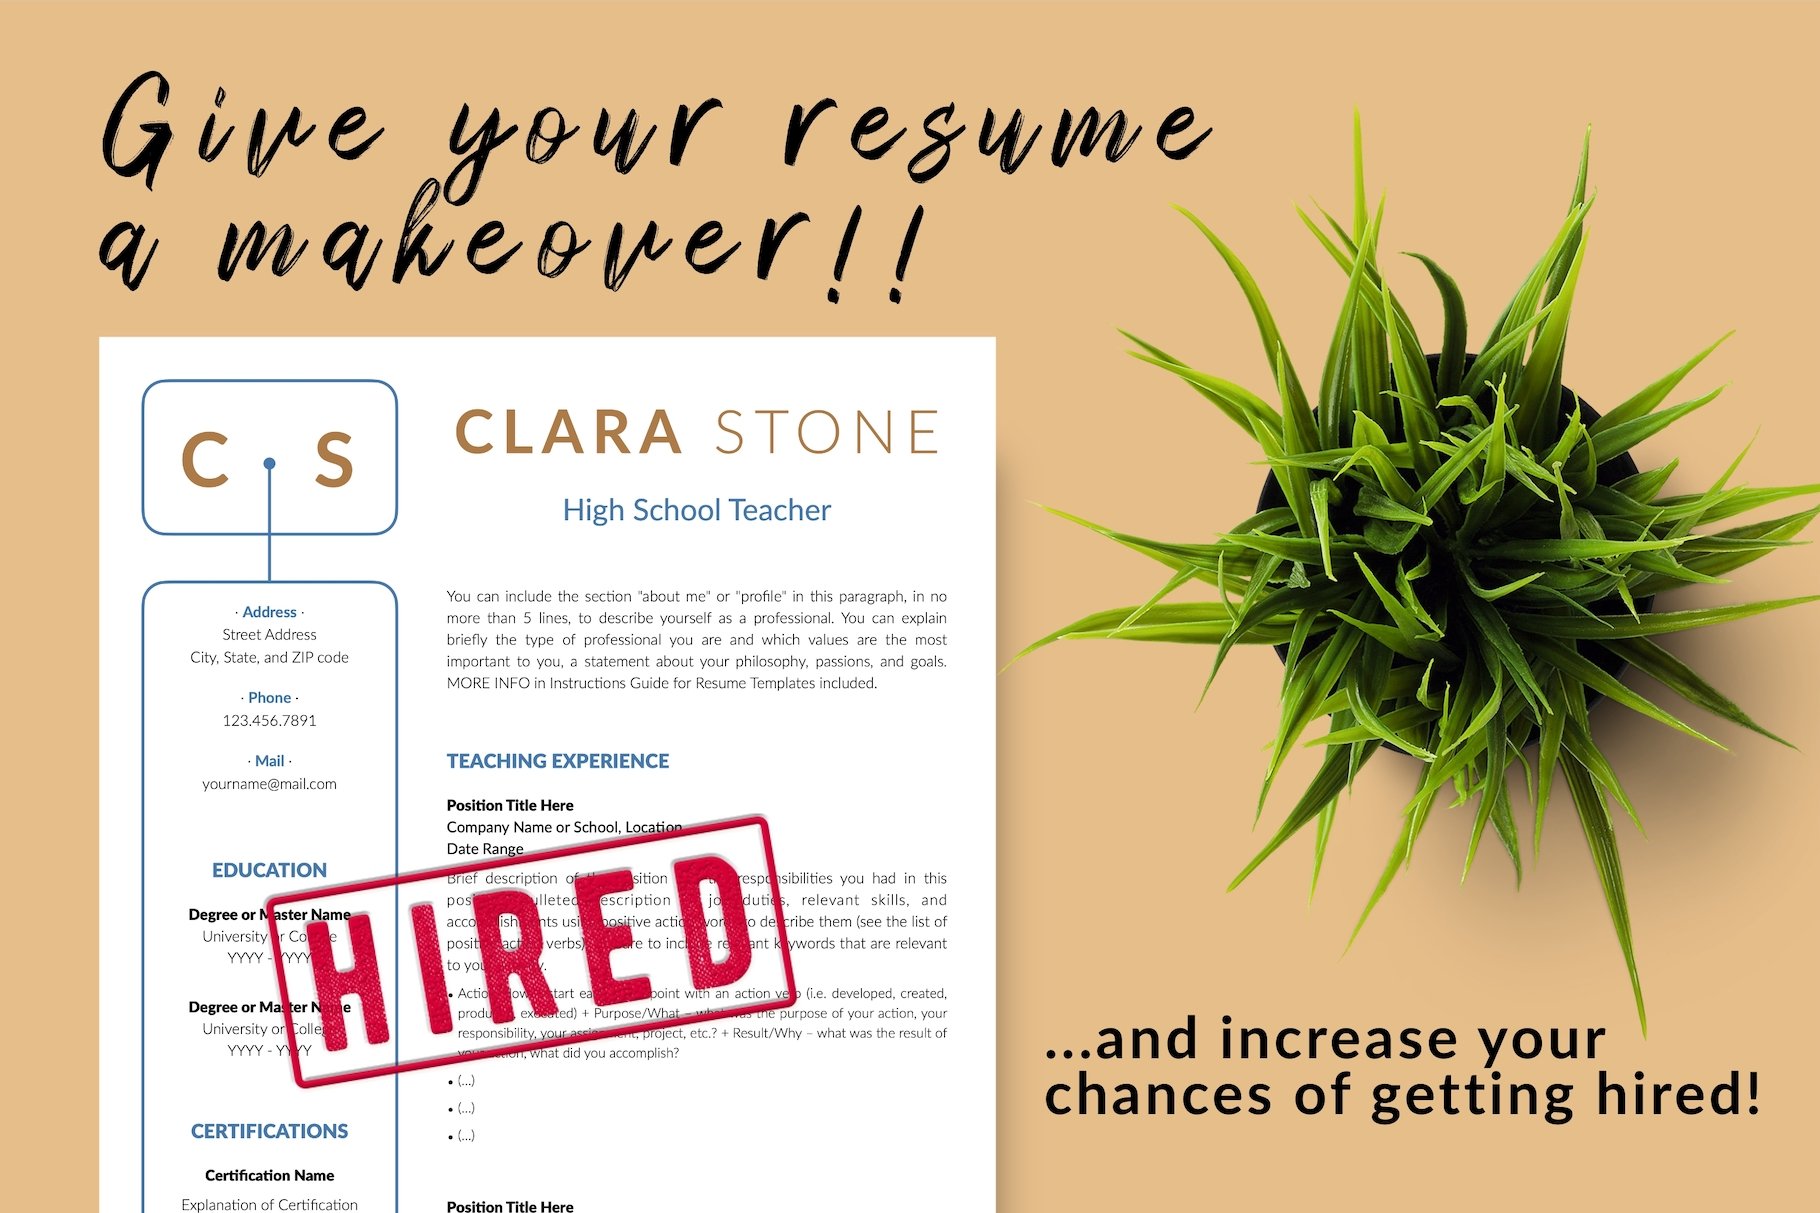 resume cv template clara stone for creative market 16 give your resume a makeover 163